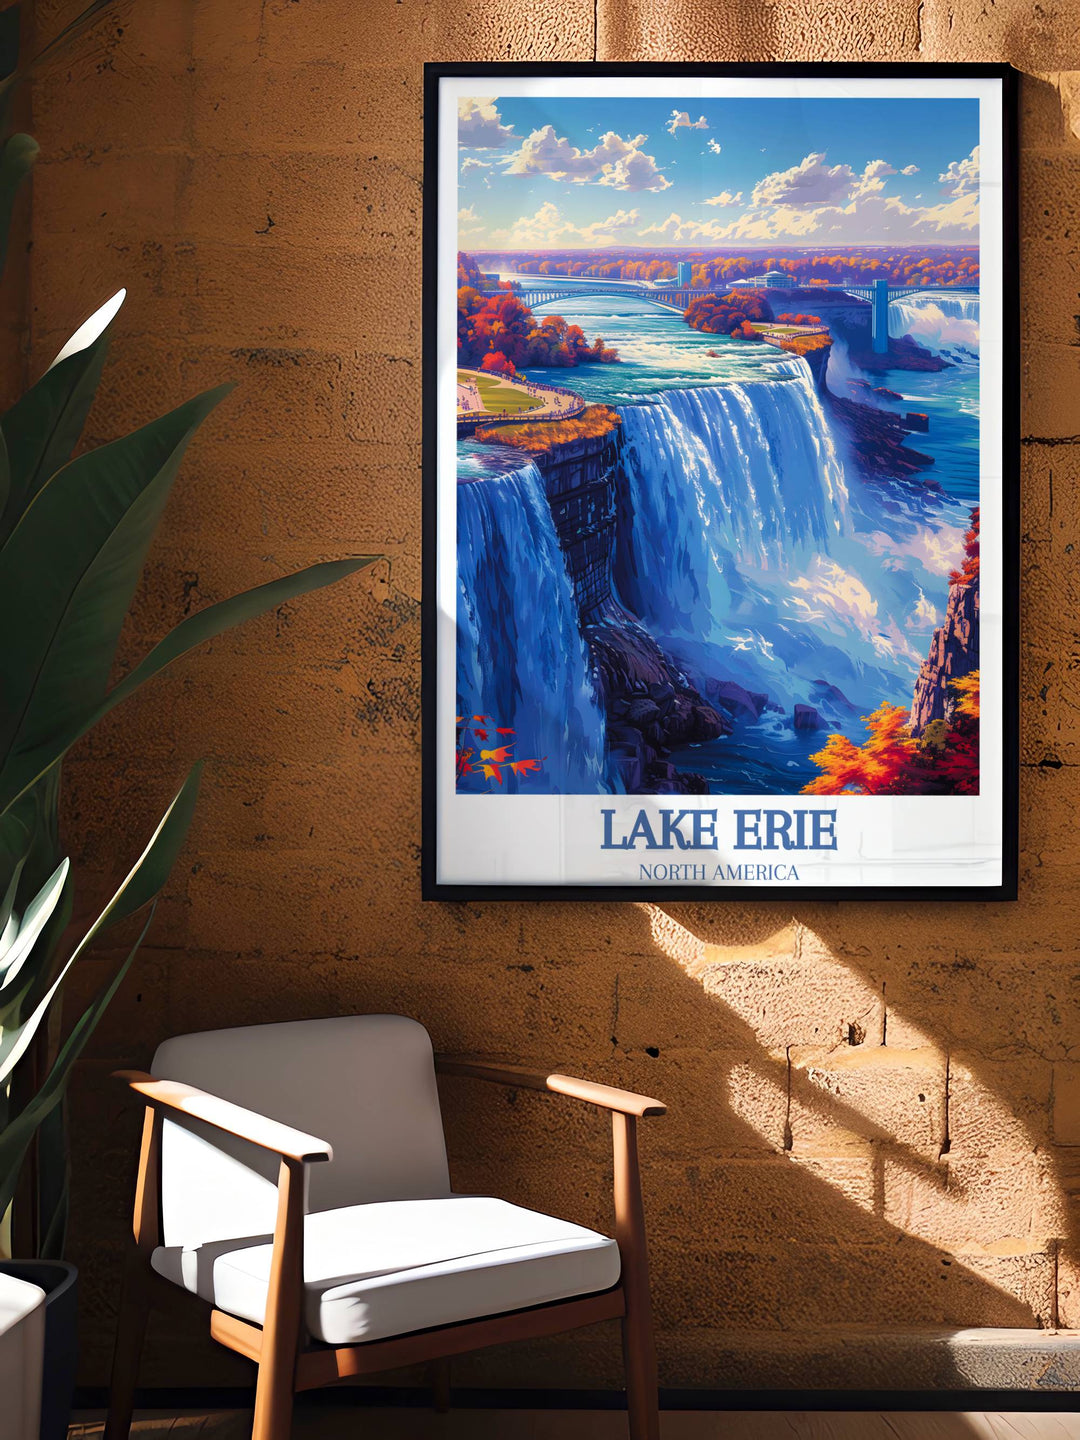 Christmas gifts for art lovers, choose a Lake Erie painting or a dynamic South America poster to enchant and inspire.